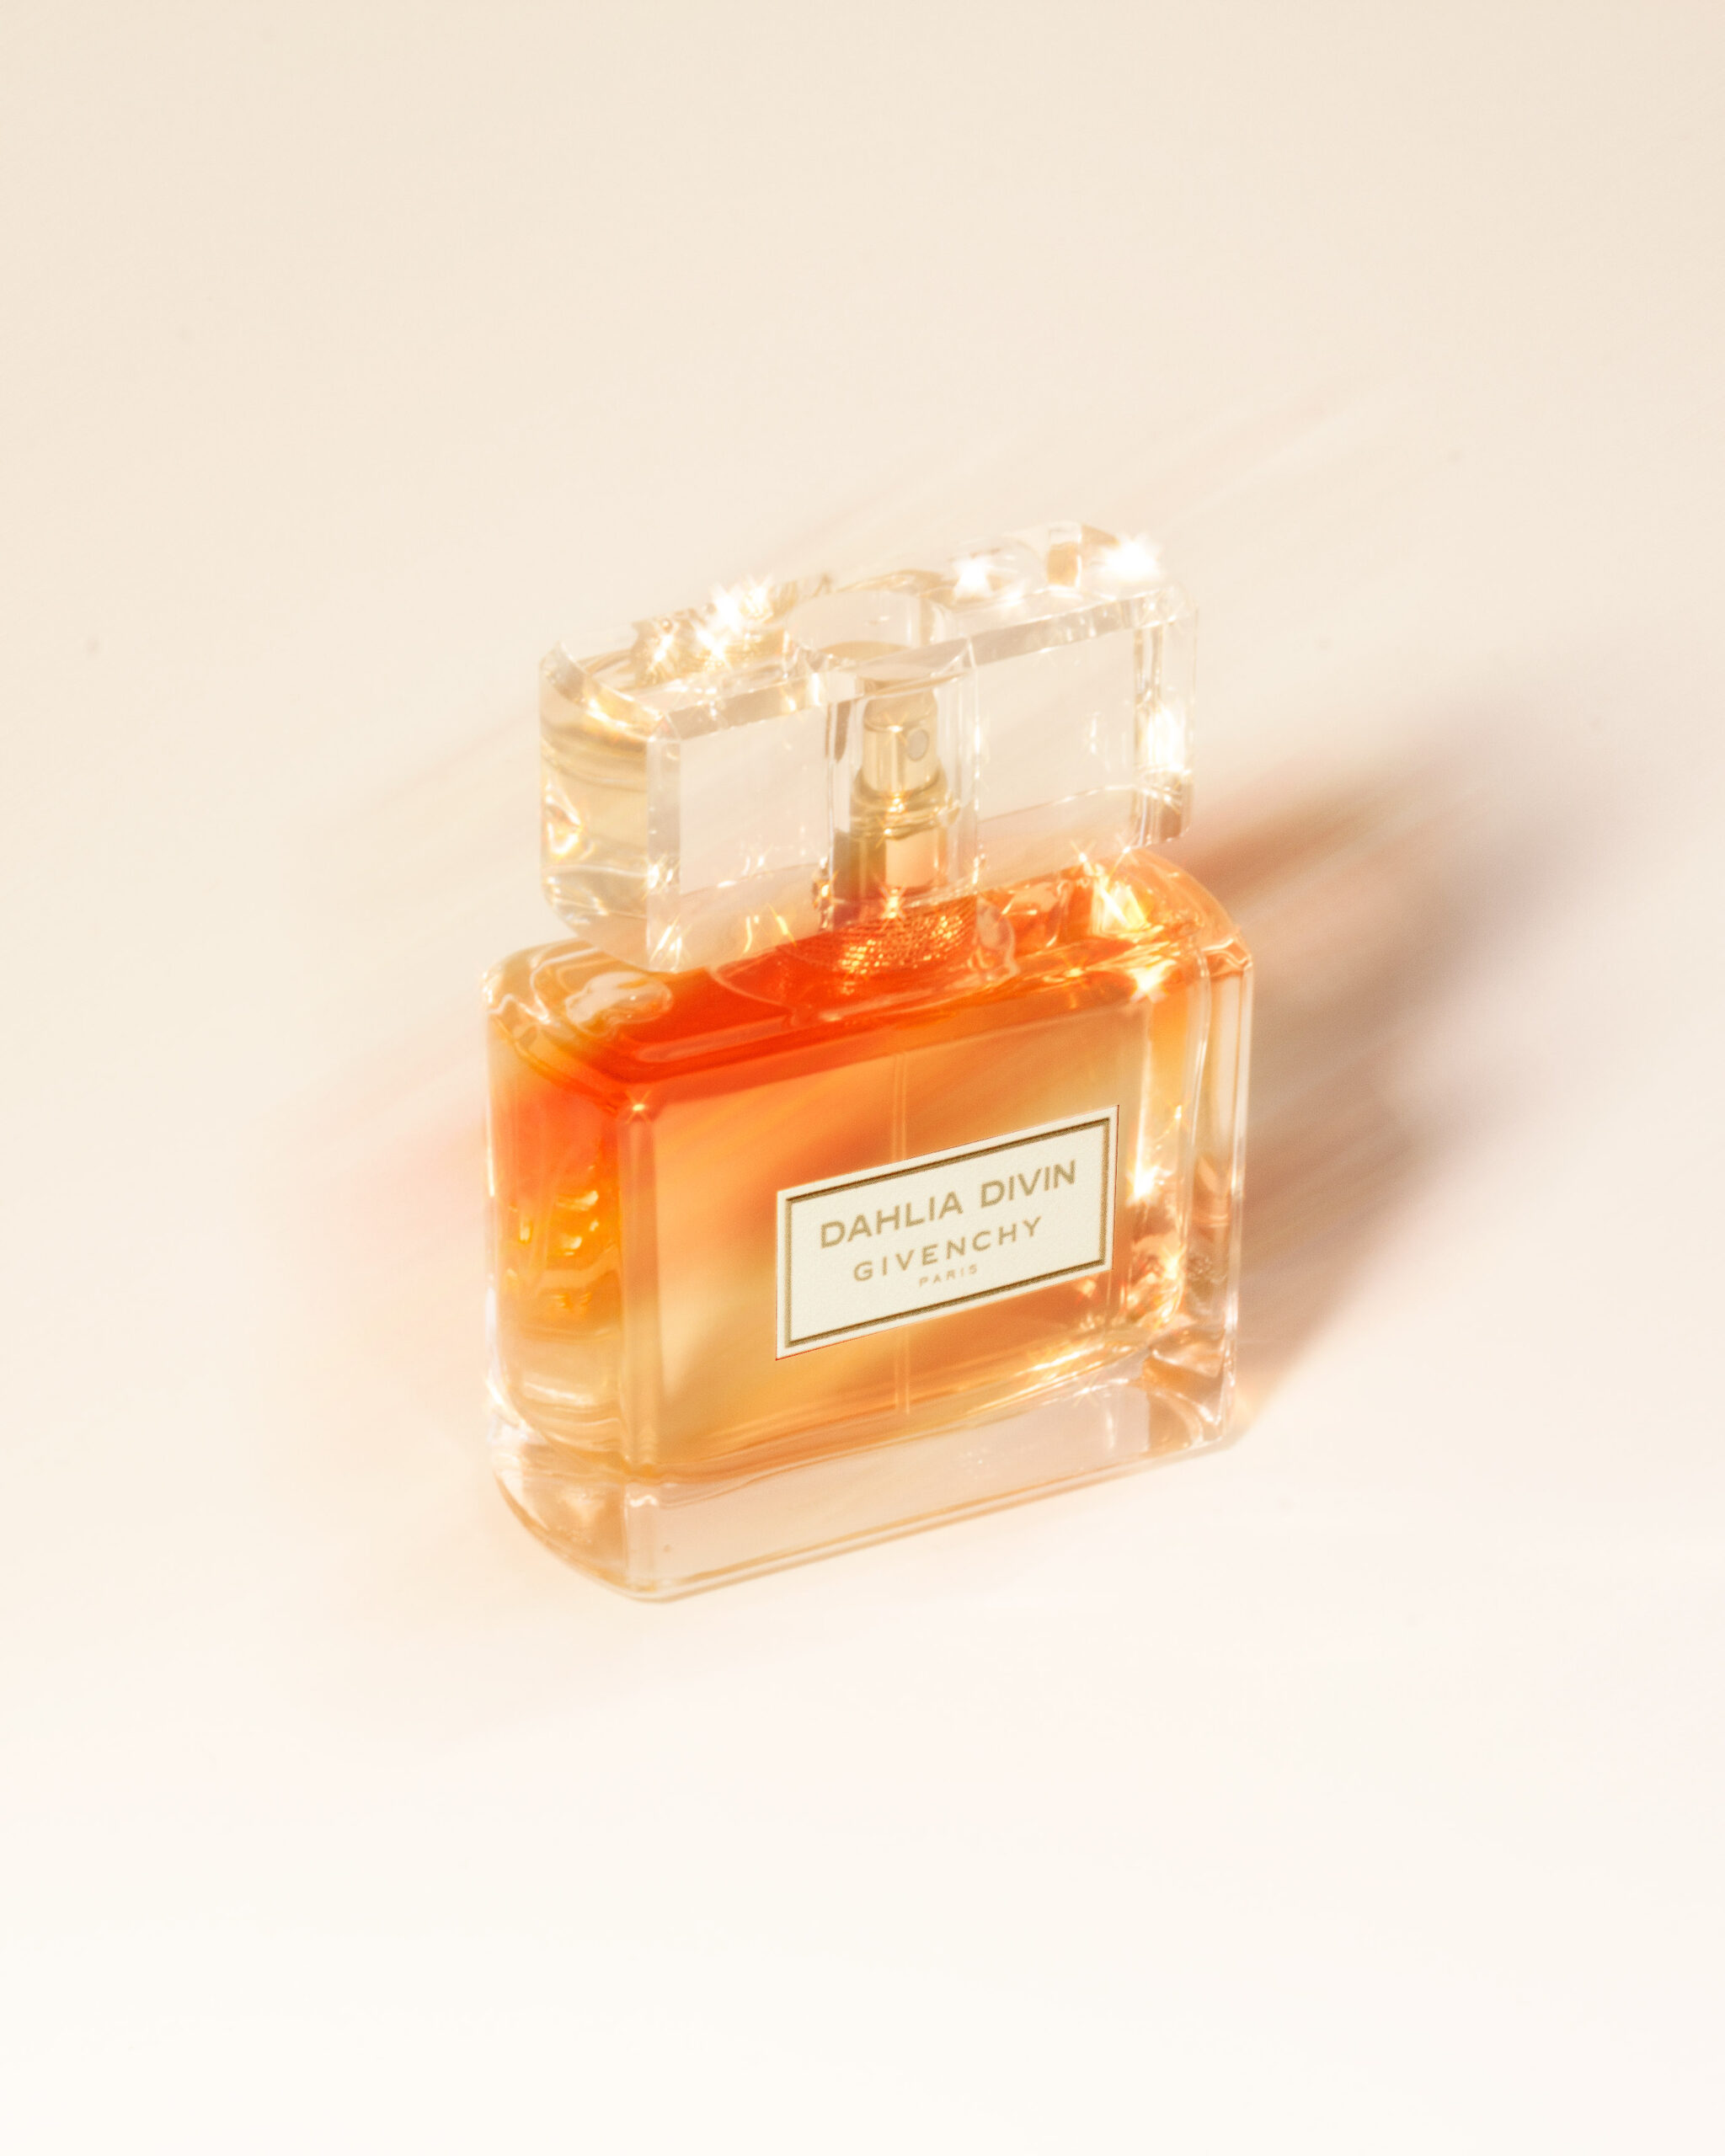 LollyPix_GIVENCHY_Dahlia_Divin_Perfume_Product_Photography